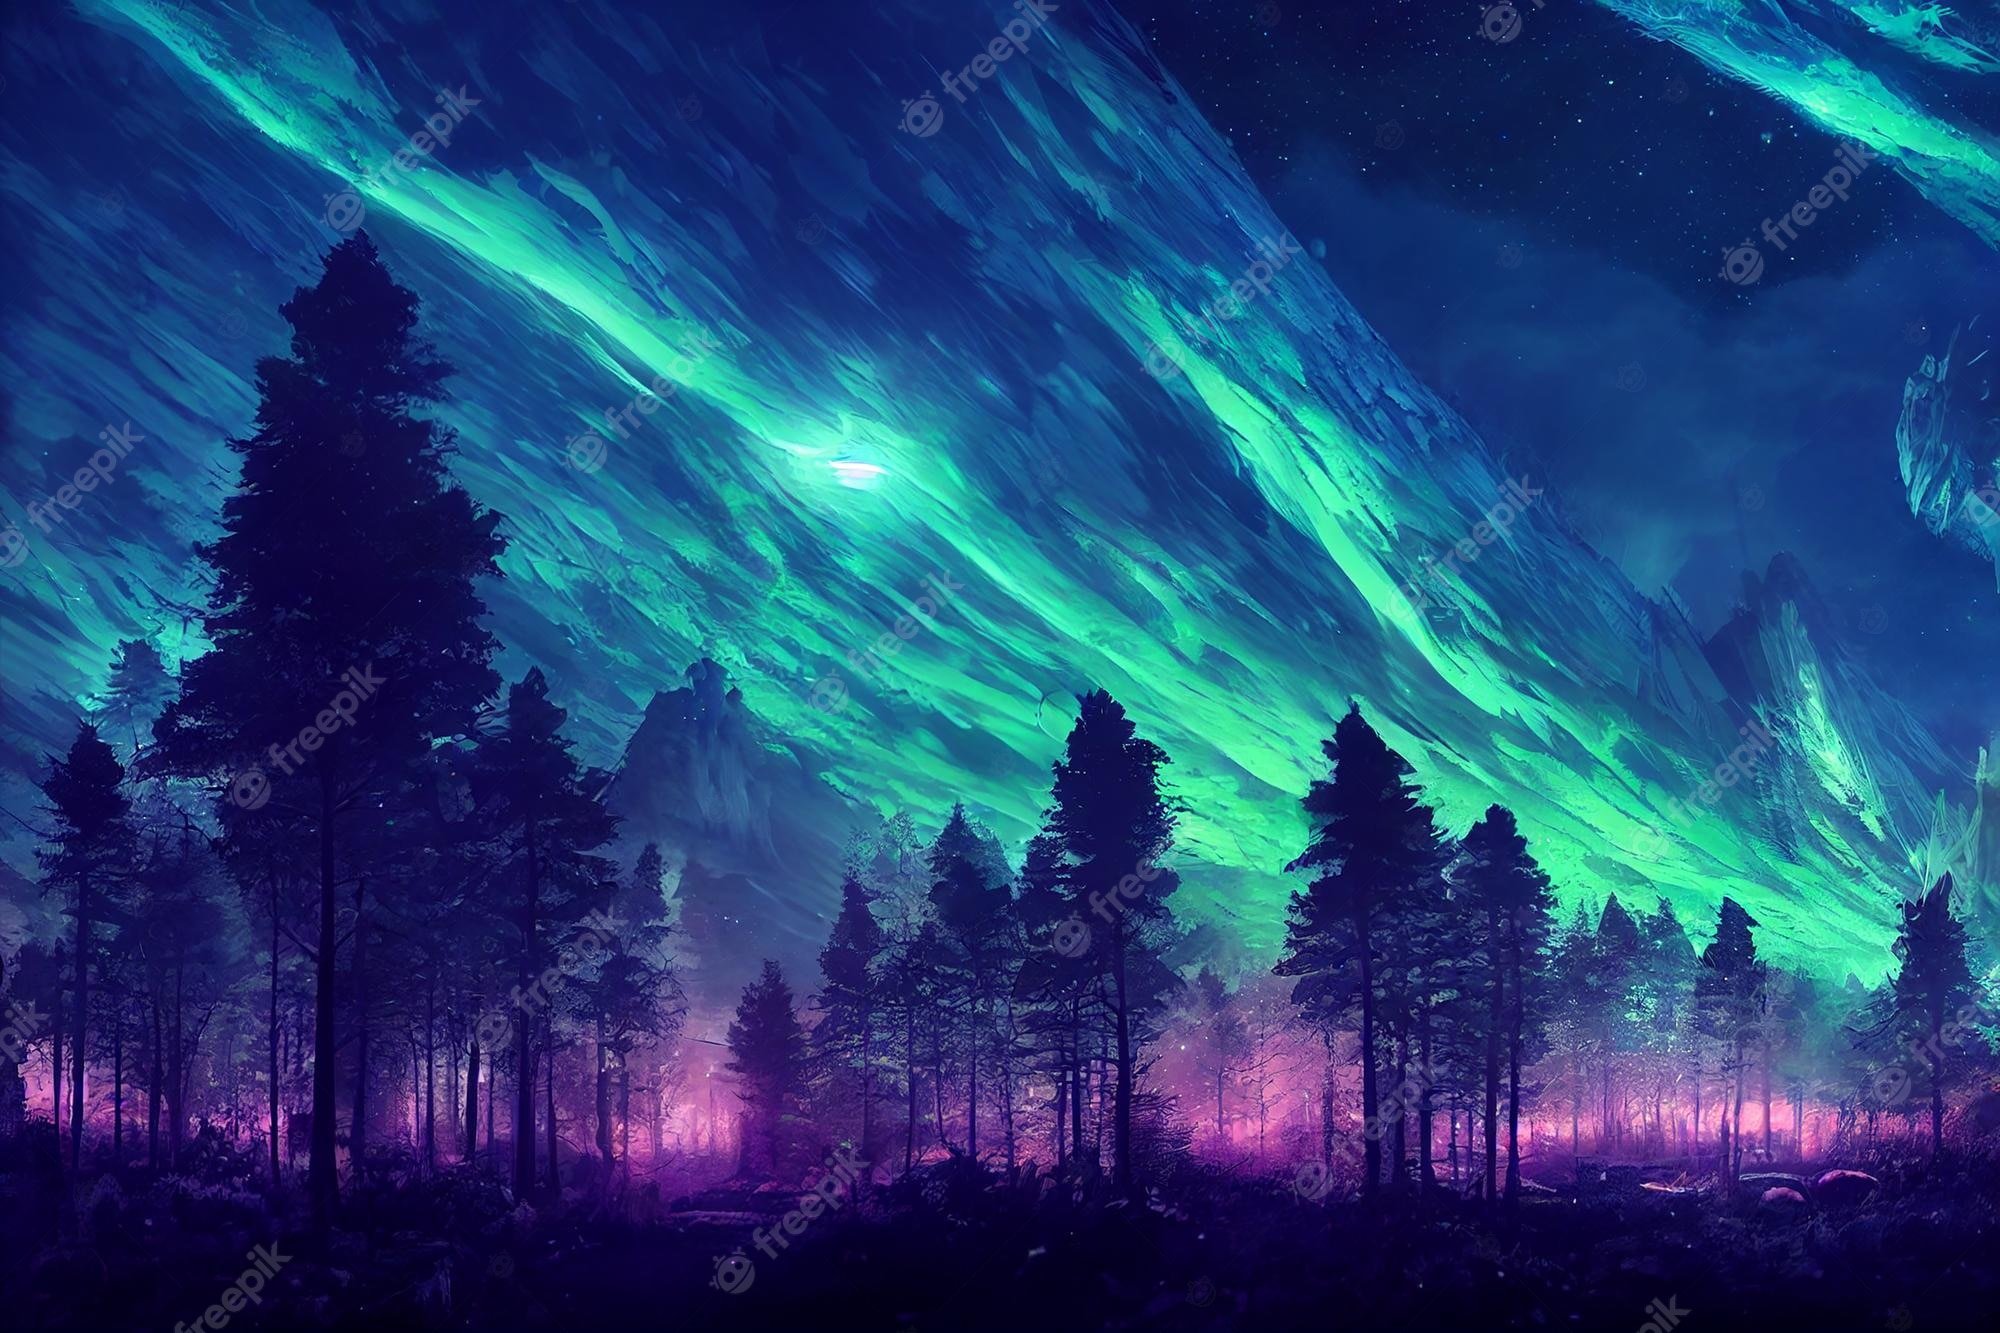 Premium Photod illustration fantasy of neon forest on beautiful sky glowing colorful look like fairytale